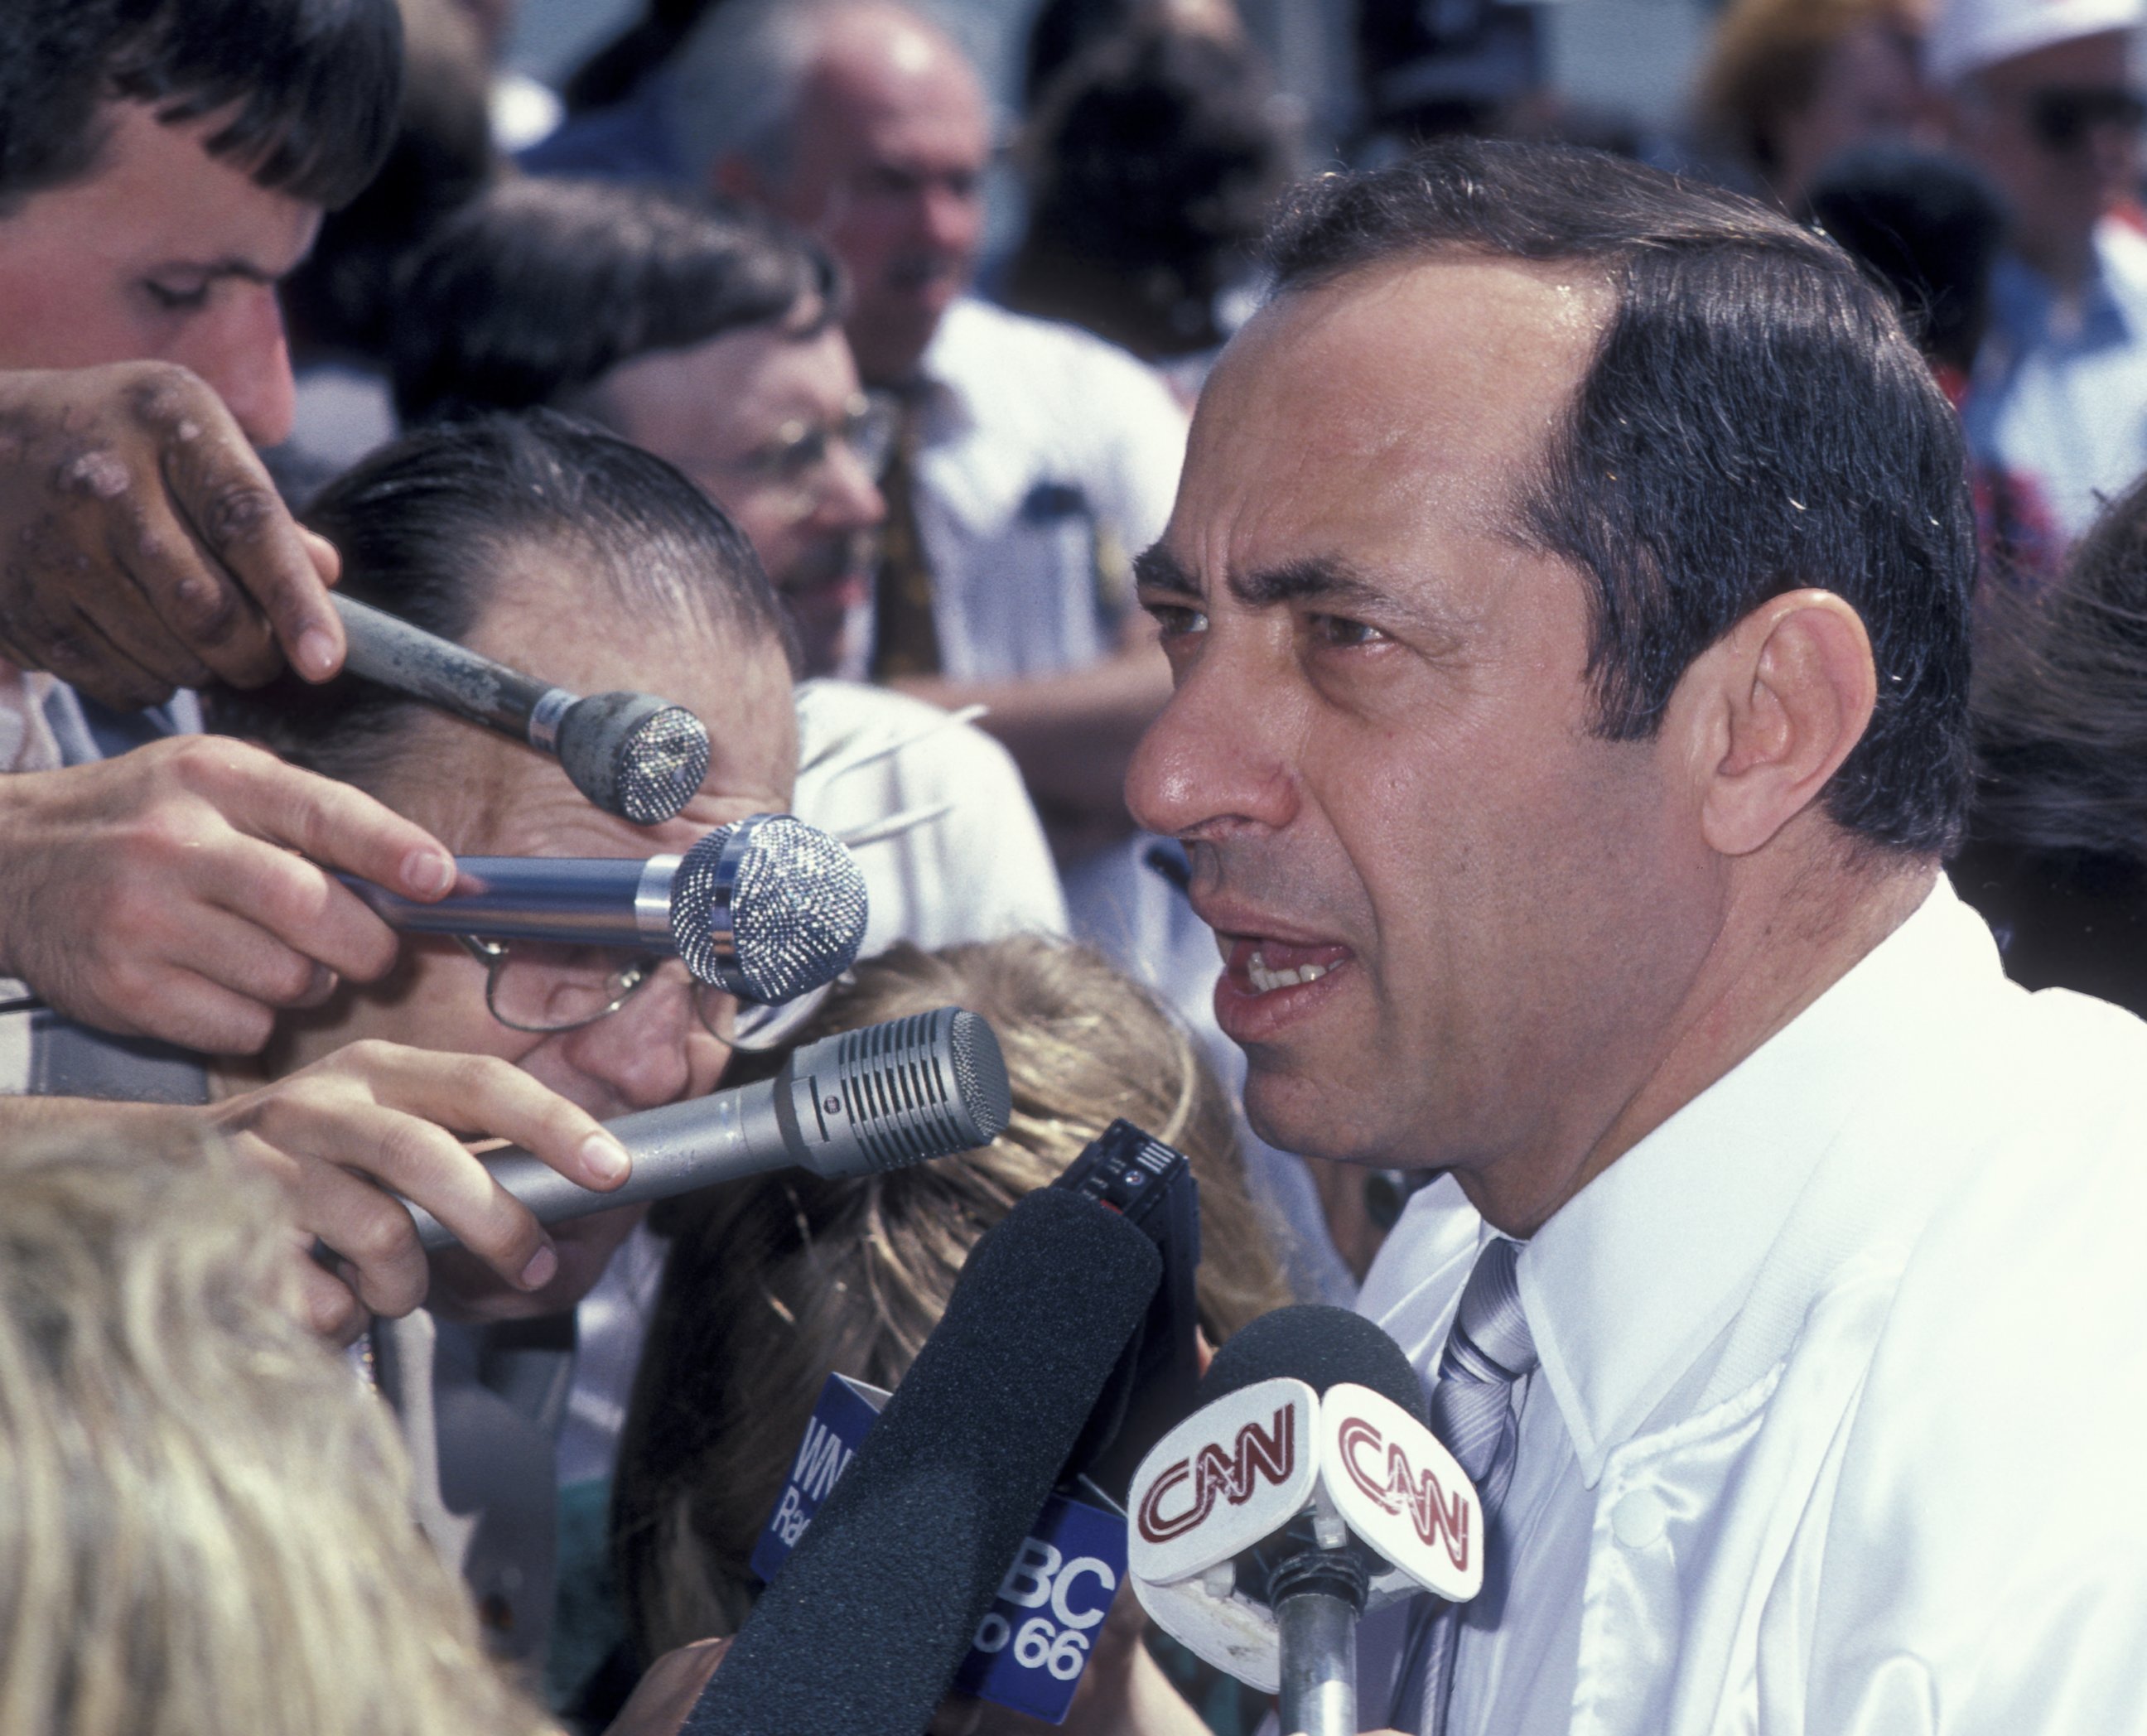 PHOTO: Governor Mario Cuomo attends the Hands Across America Benefit on May 25, 1986 in Los Angeles, Calif.